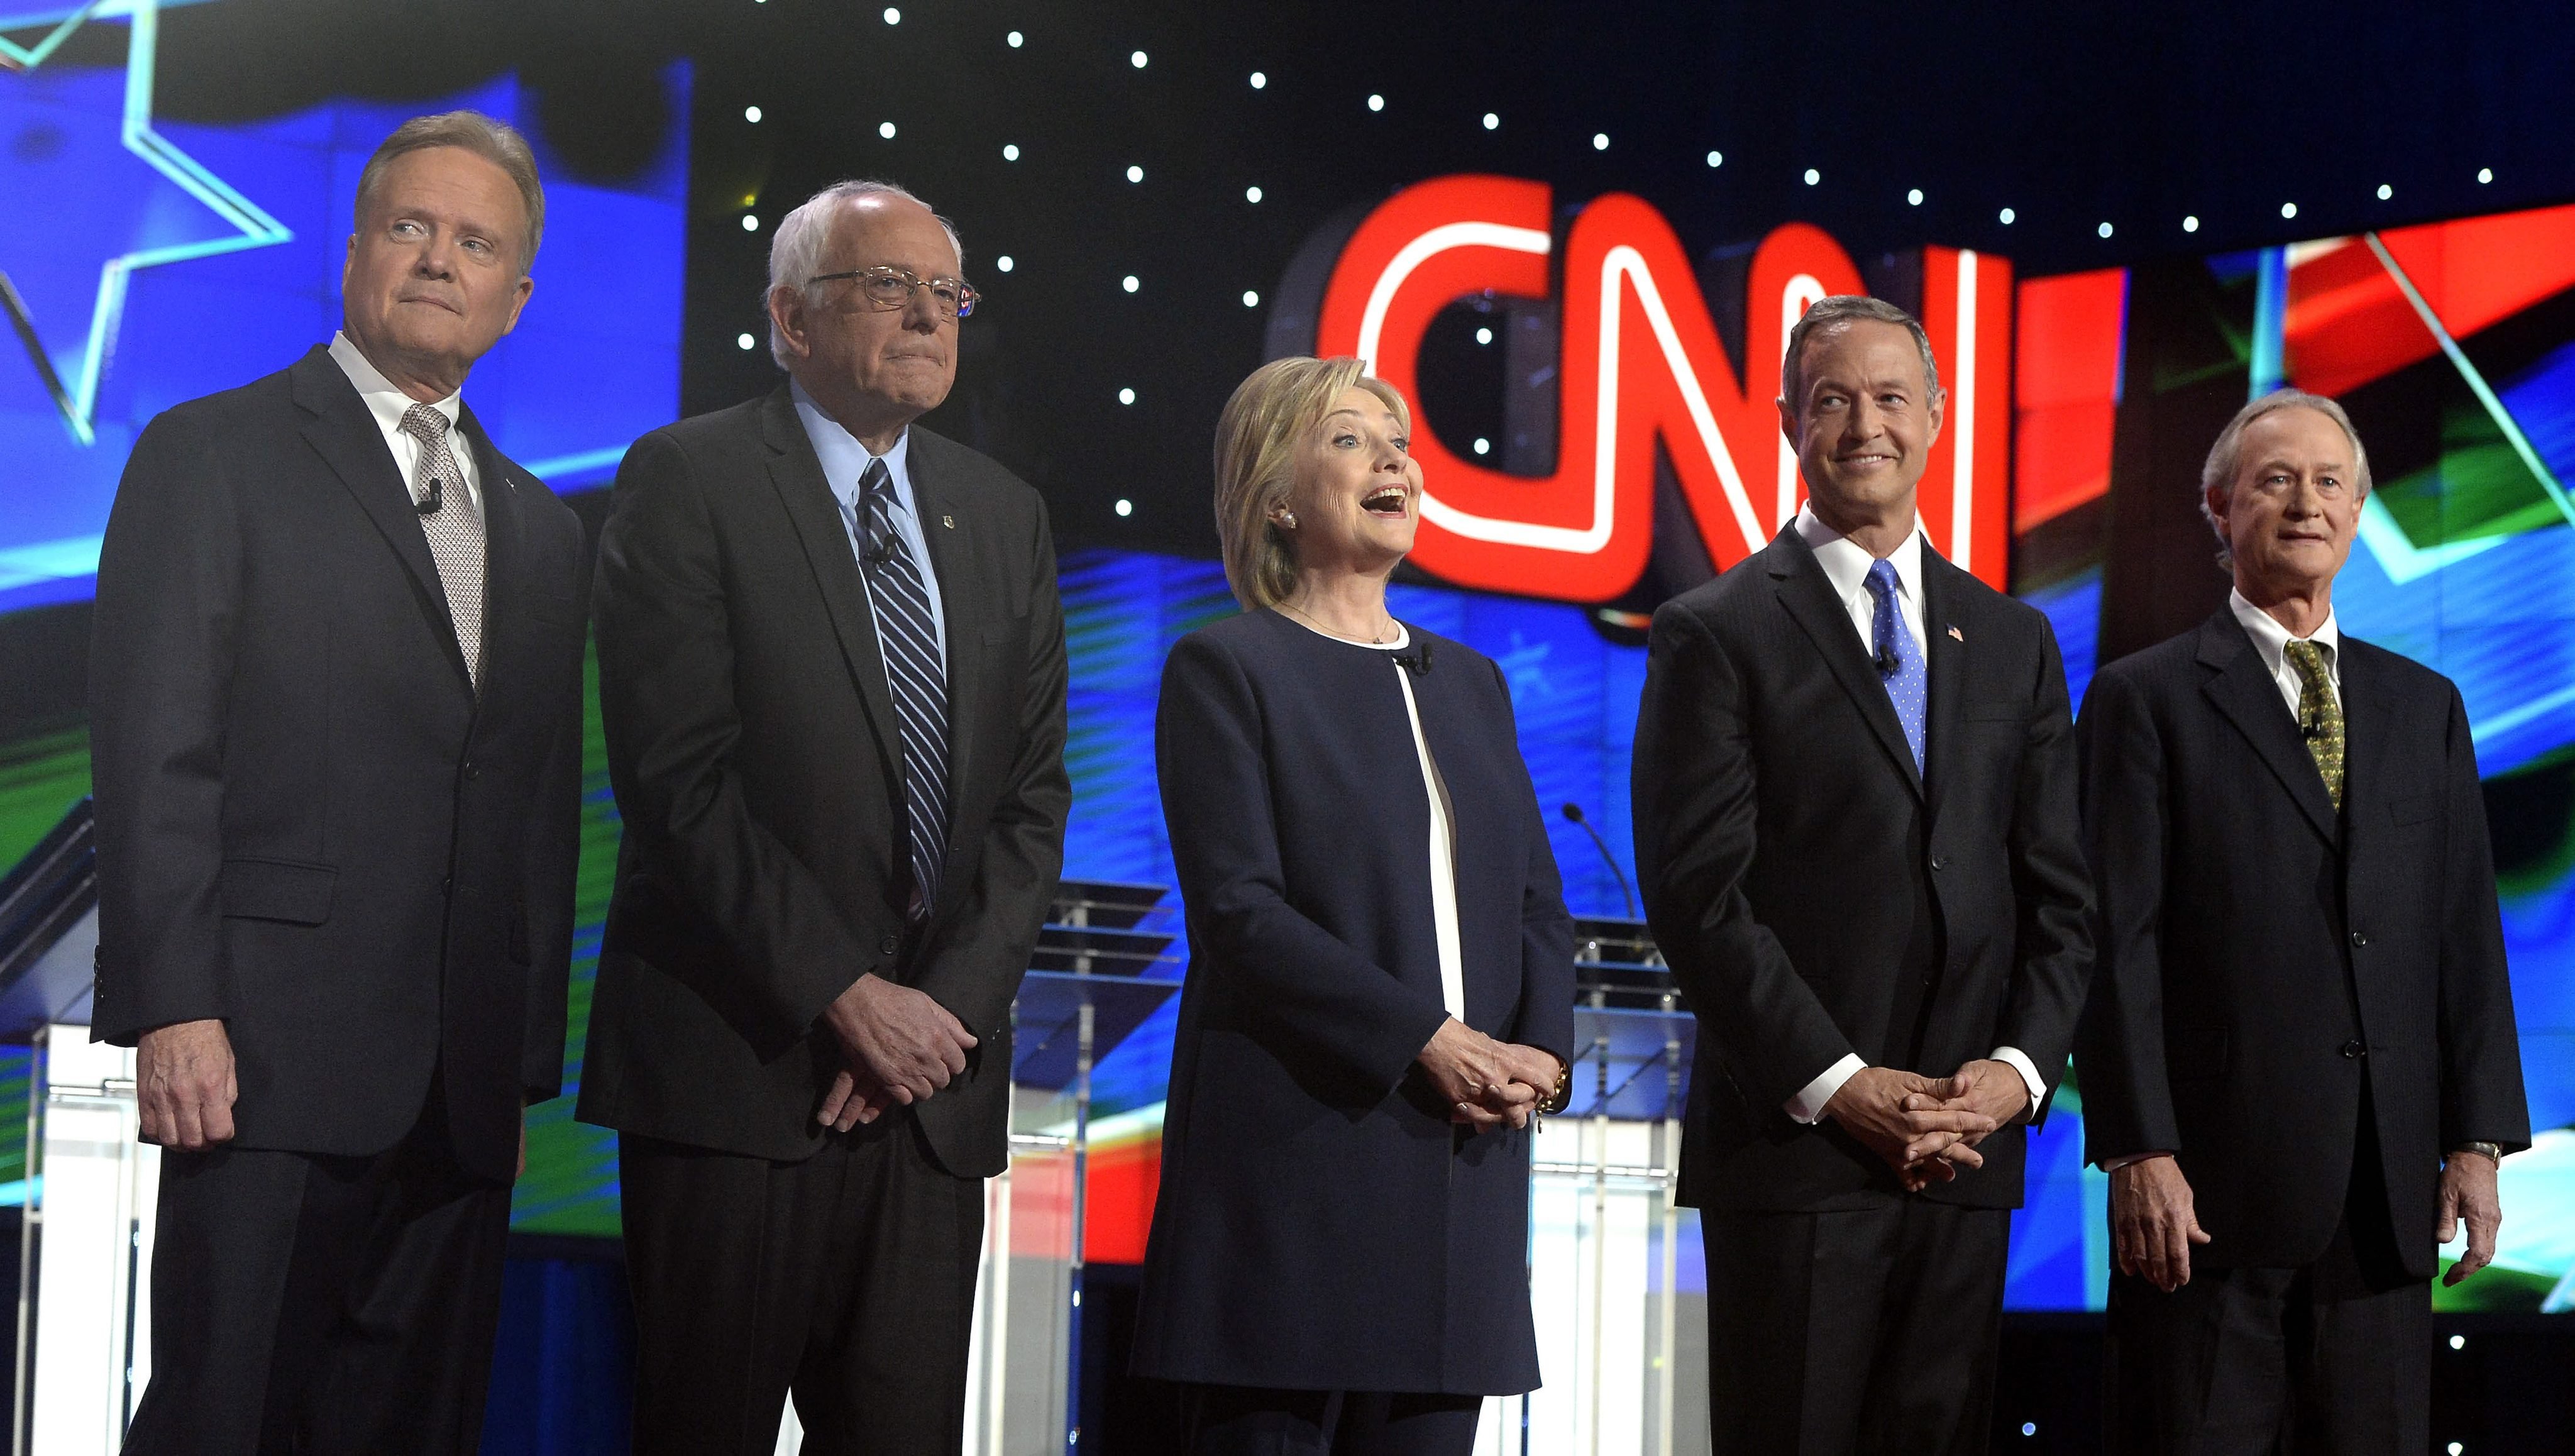 Jim Webb, Bernie Sanders, Hillary Clinton, Martin O'Malley and Lincoln Chafee pose on stage prior to the start of the Democratic debate at Wynn Las Vegas in Las Vegas, Nevada, on Oct. 13, 2015. (Mike Nelson—EPA)